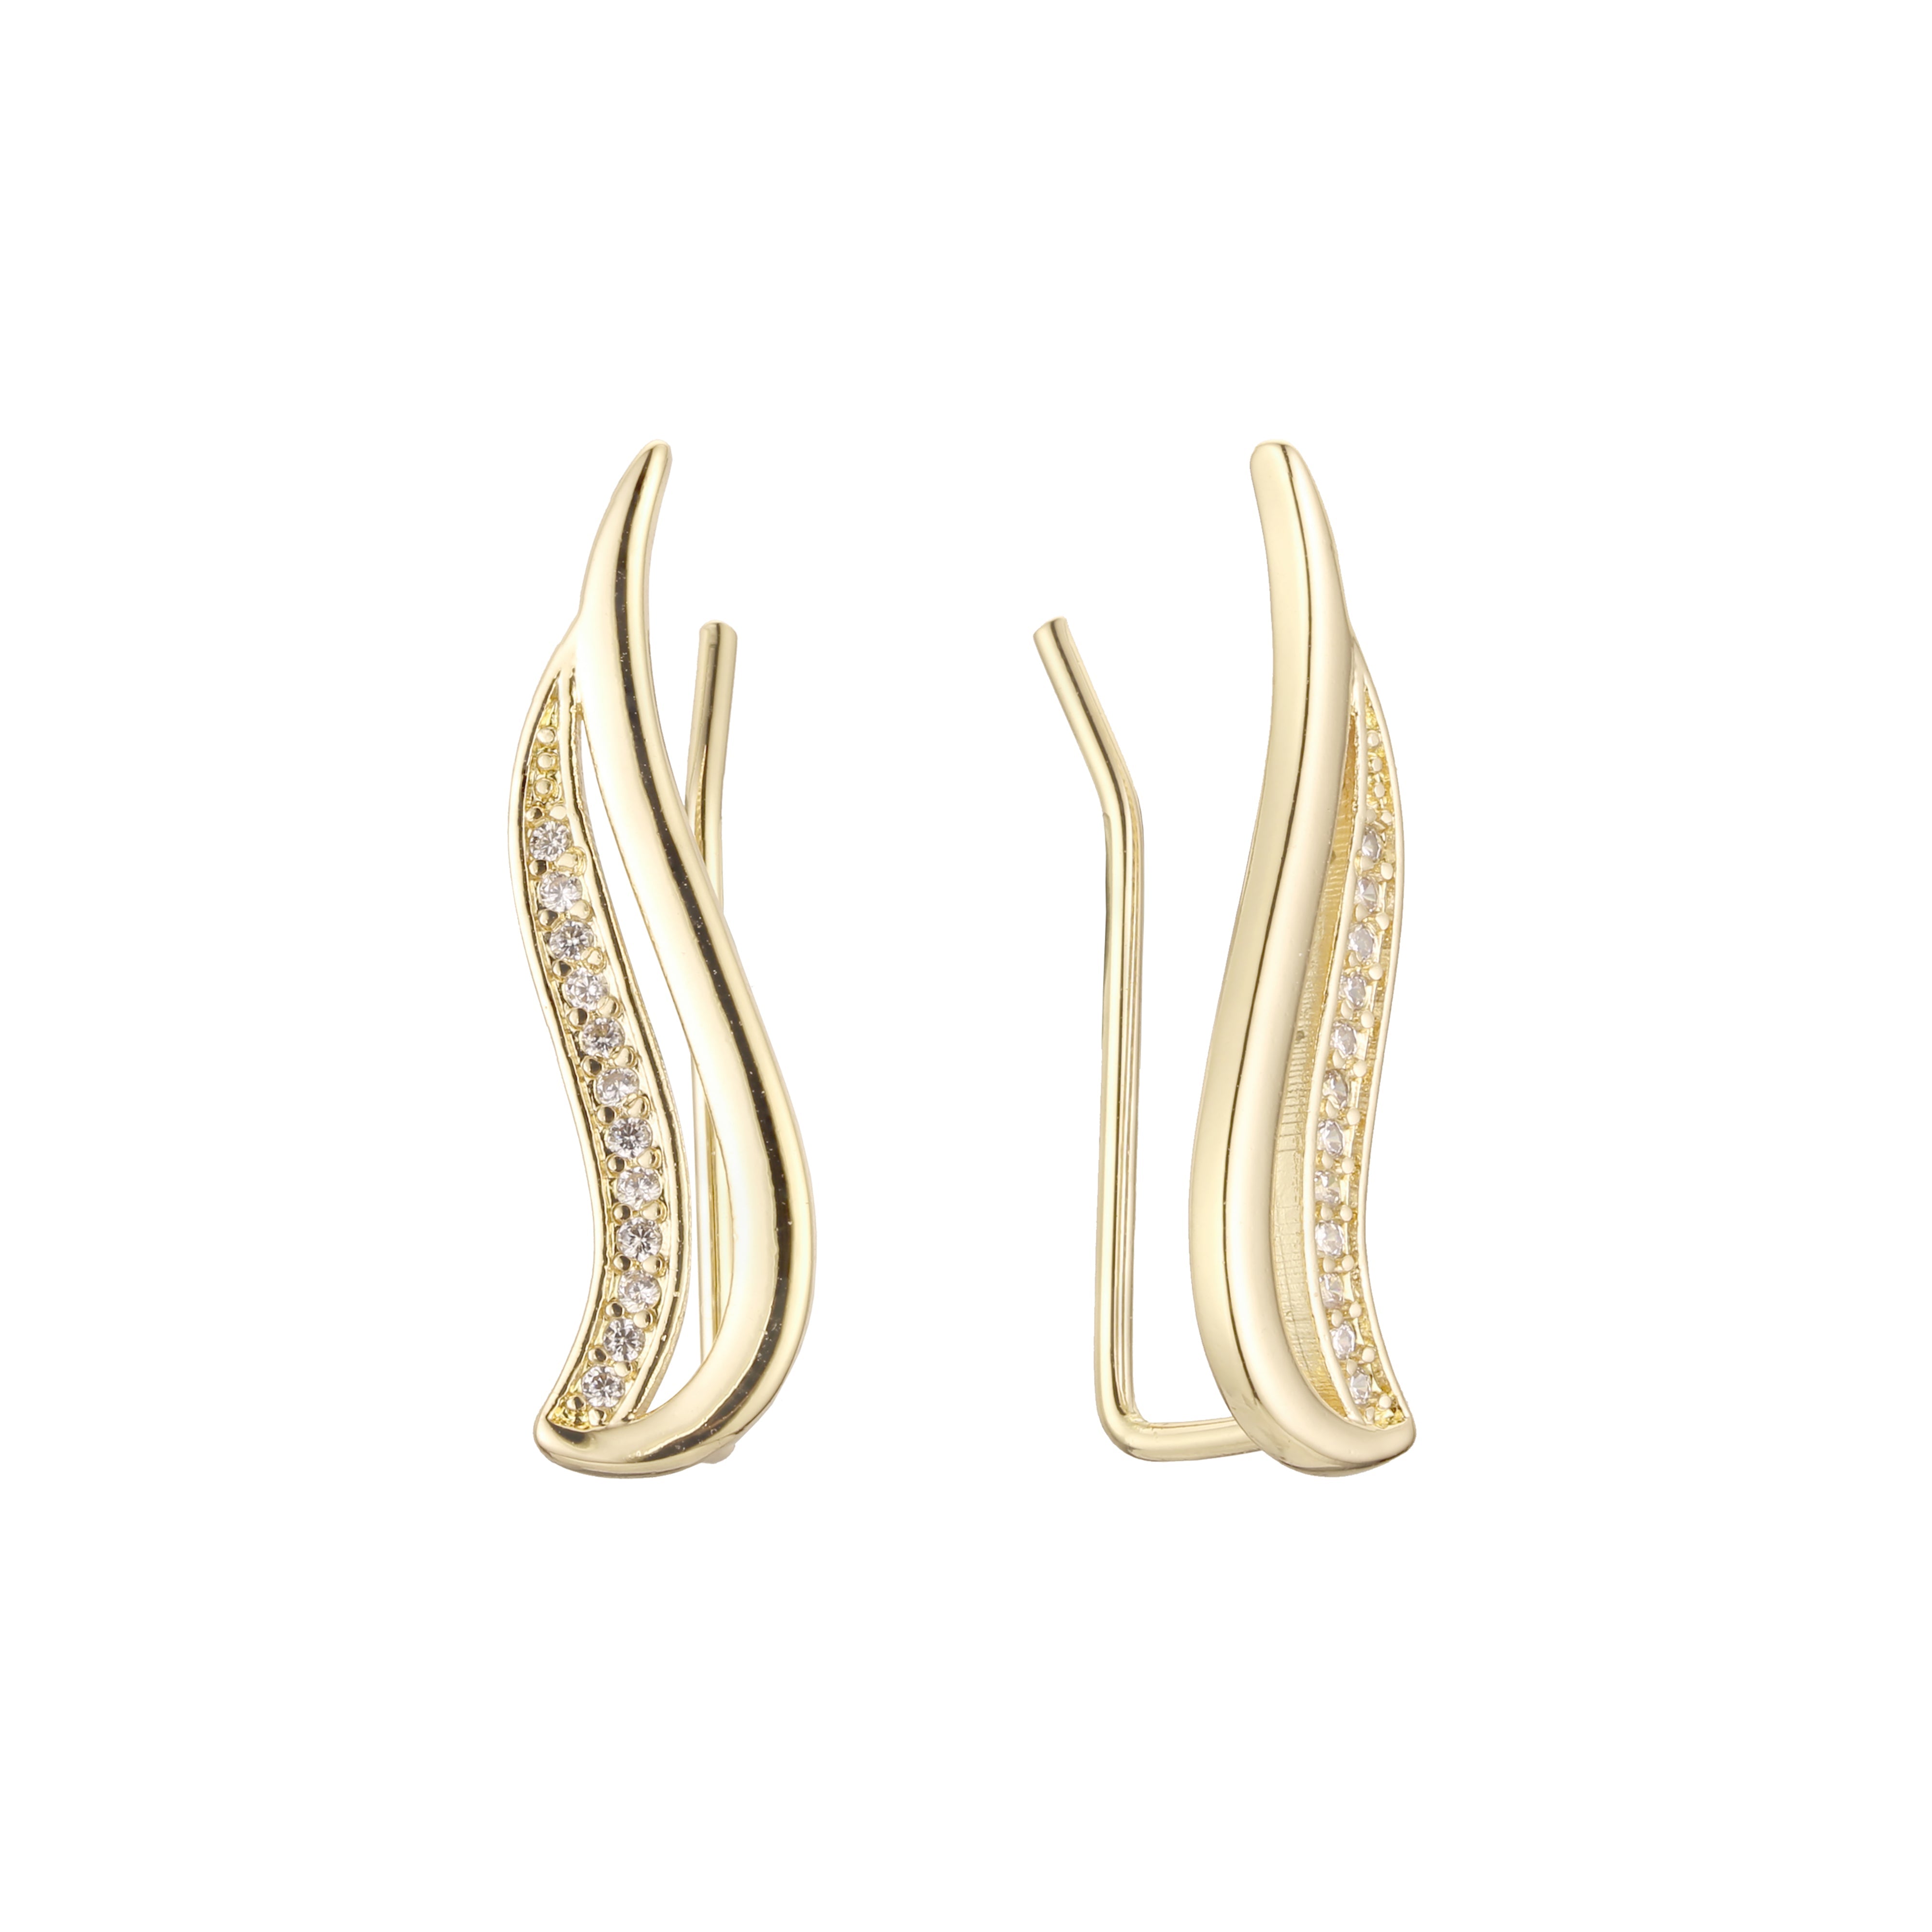 Tall fire flames crawler earrings in 14K Gold, Rose Gold, two tone plating colors